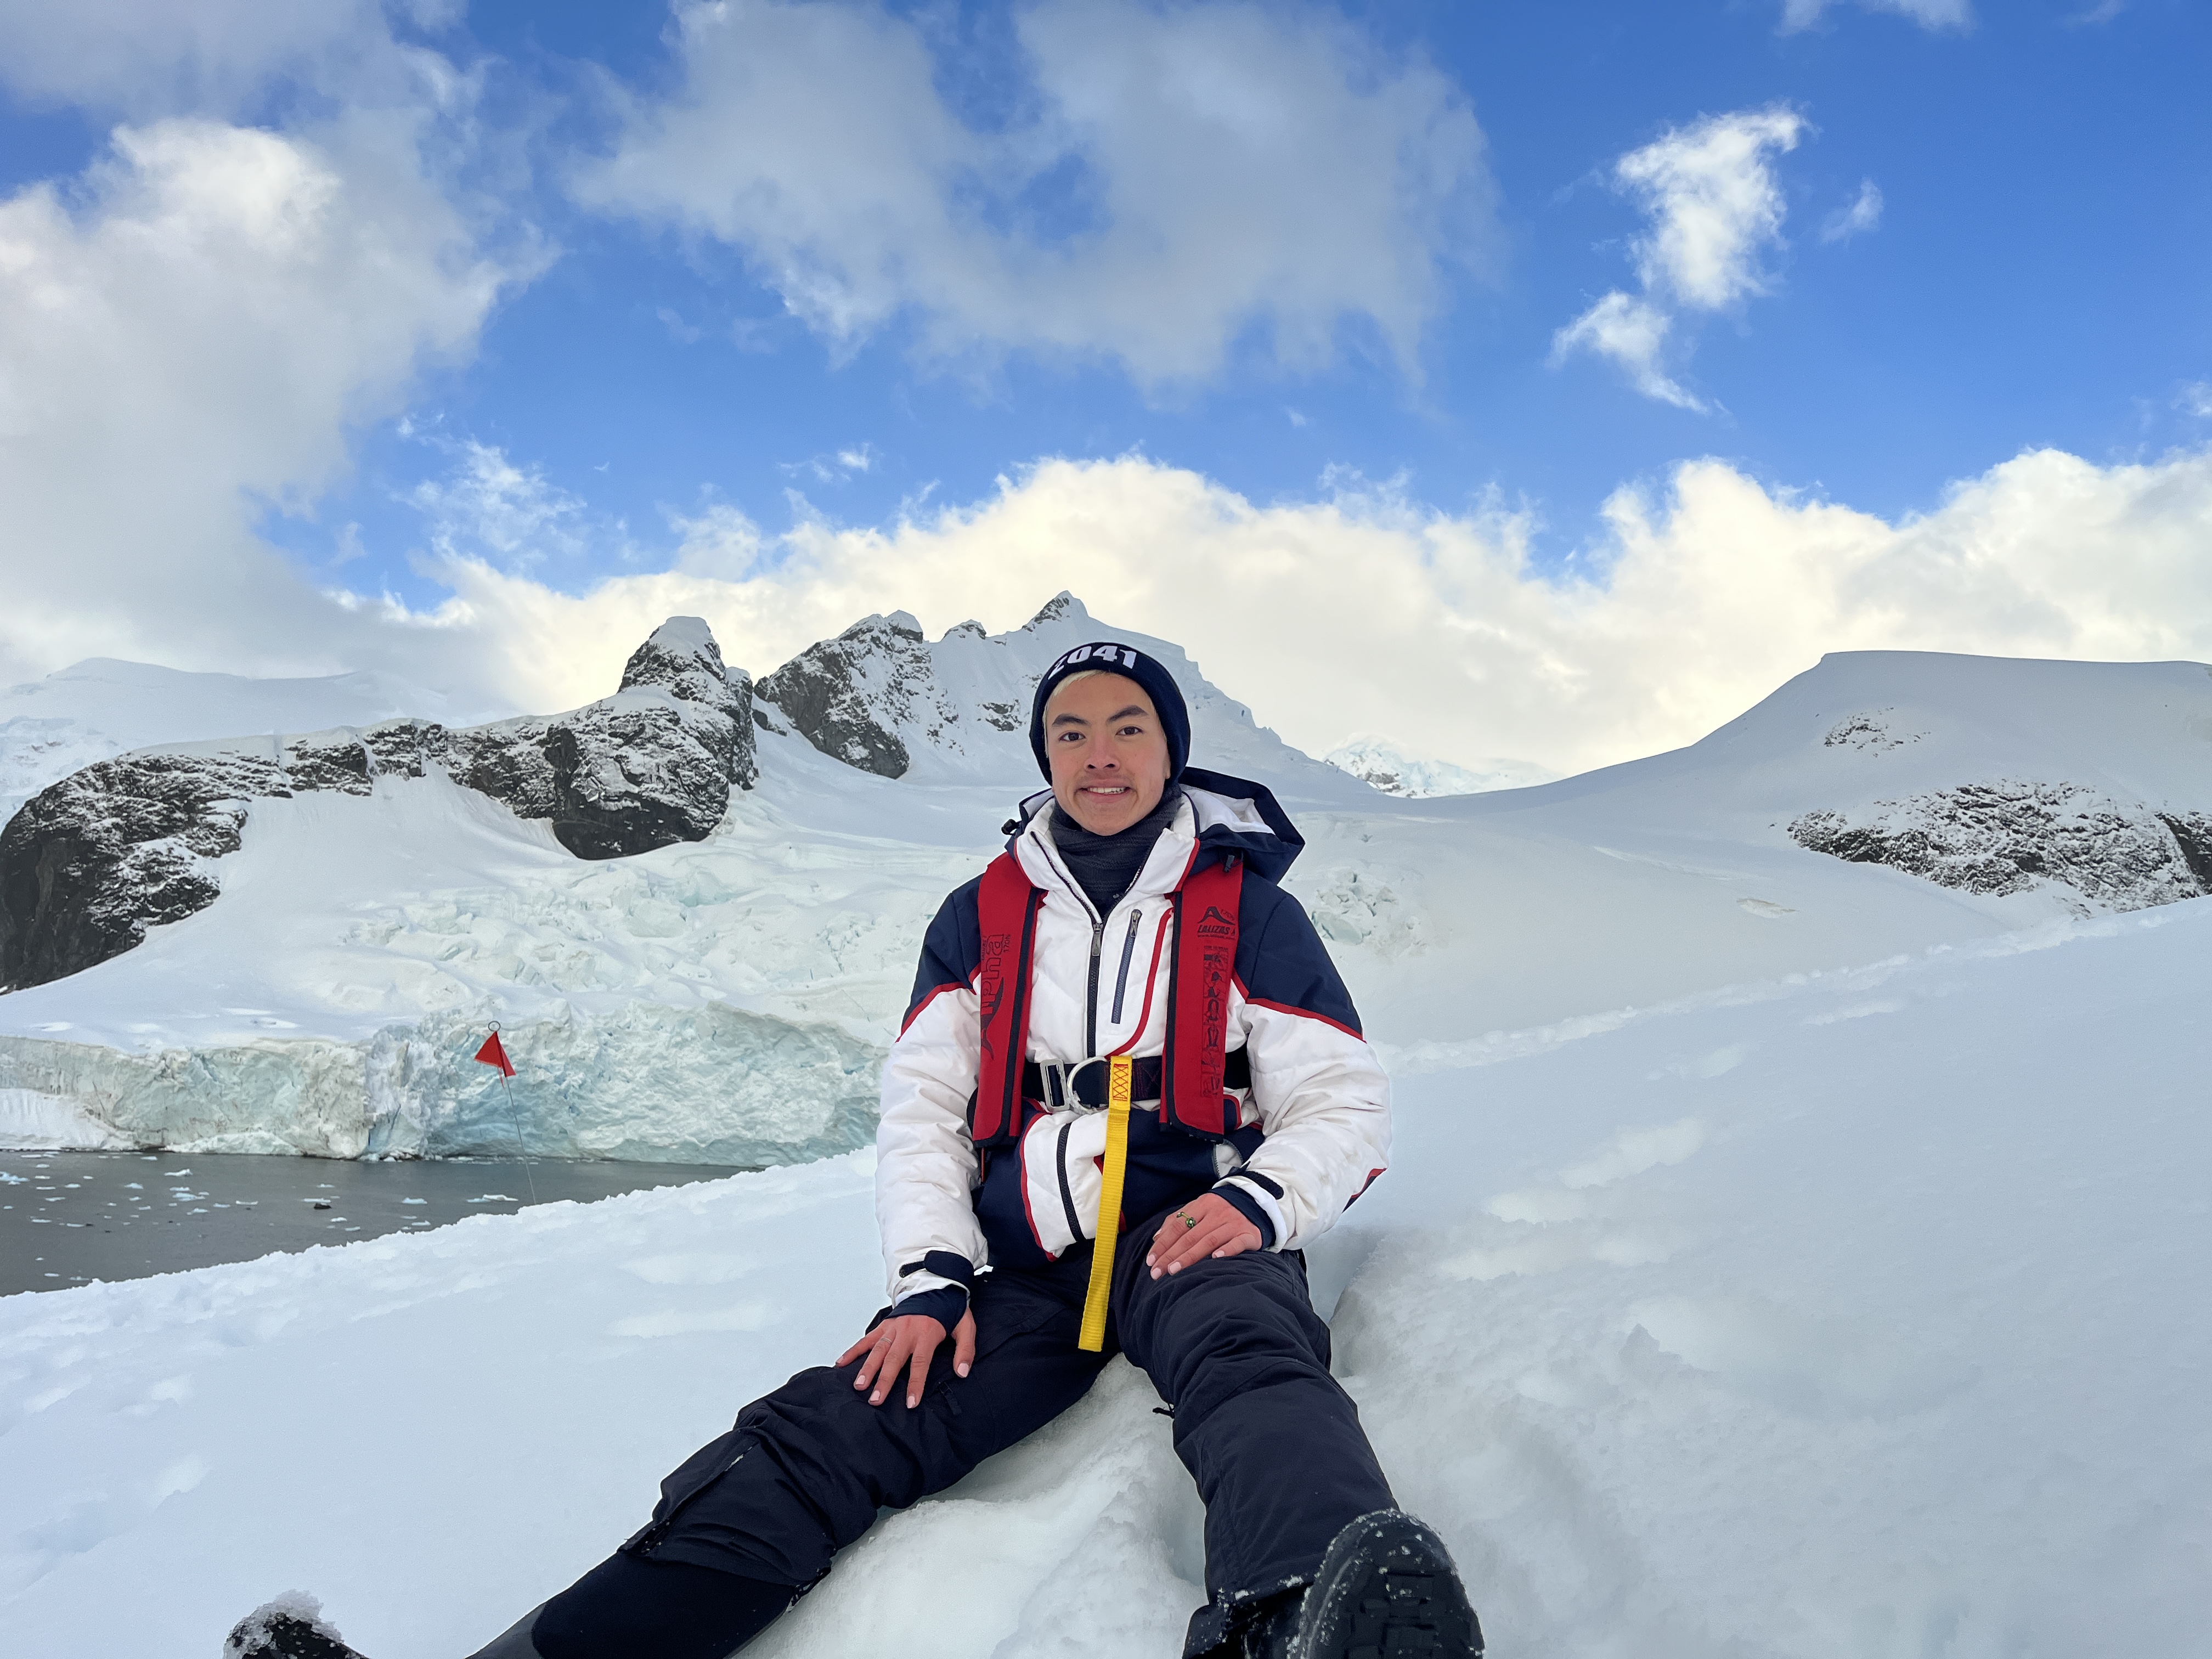 With OPG’s support, engineering student Quang Anh Nguyen took a life-changing trip this spring to Antarctica as part of the 2041 ClimateForce Antarctic Expedition.